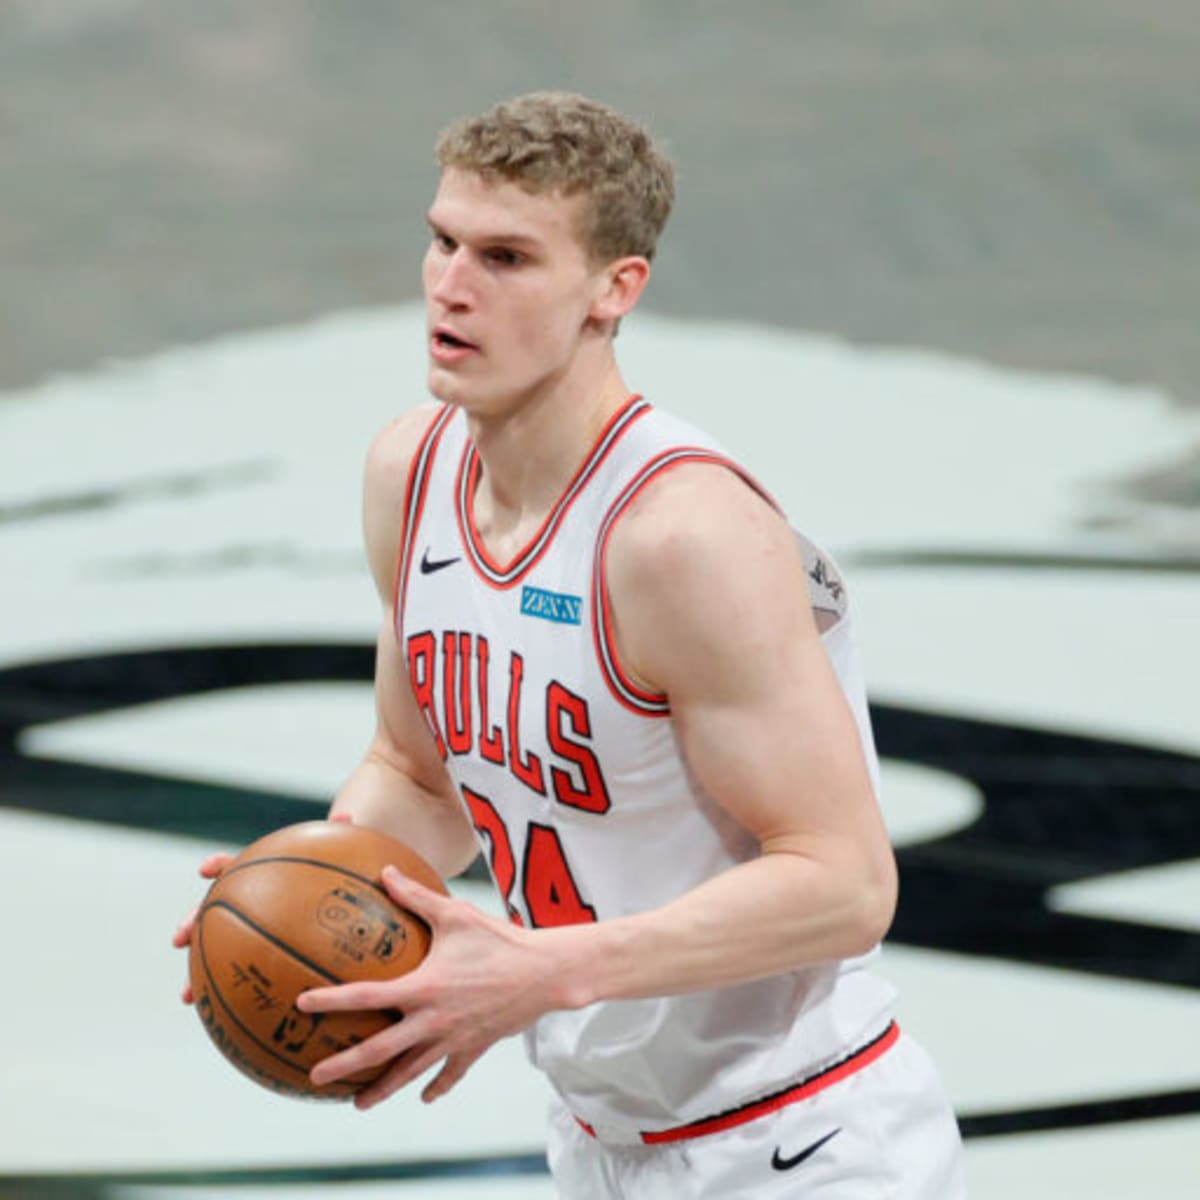 It's just a different game” - Lauri Markkanen joins Luka Doncic in